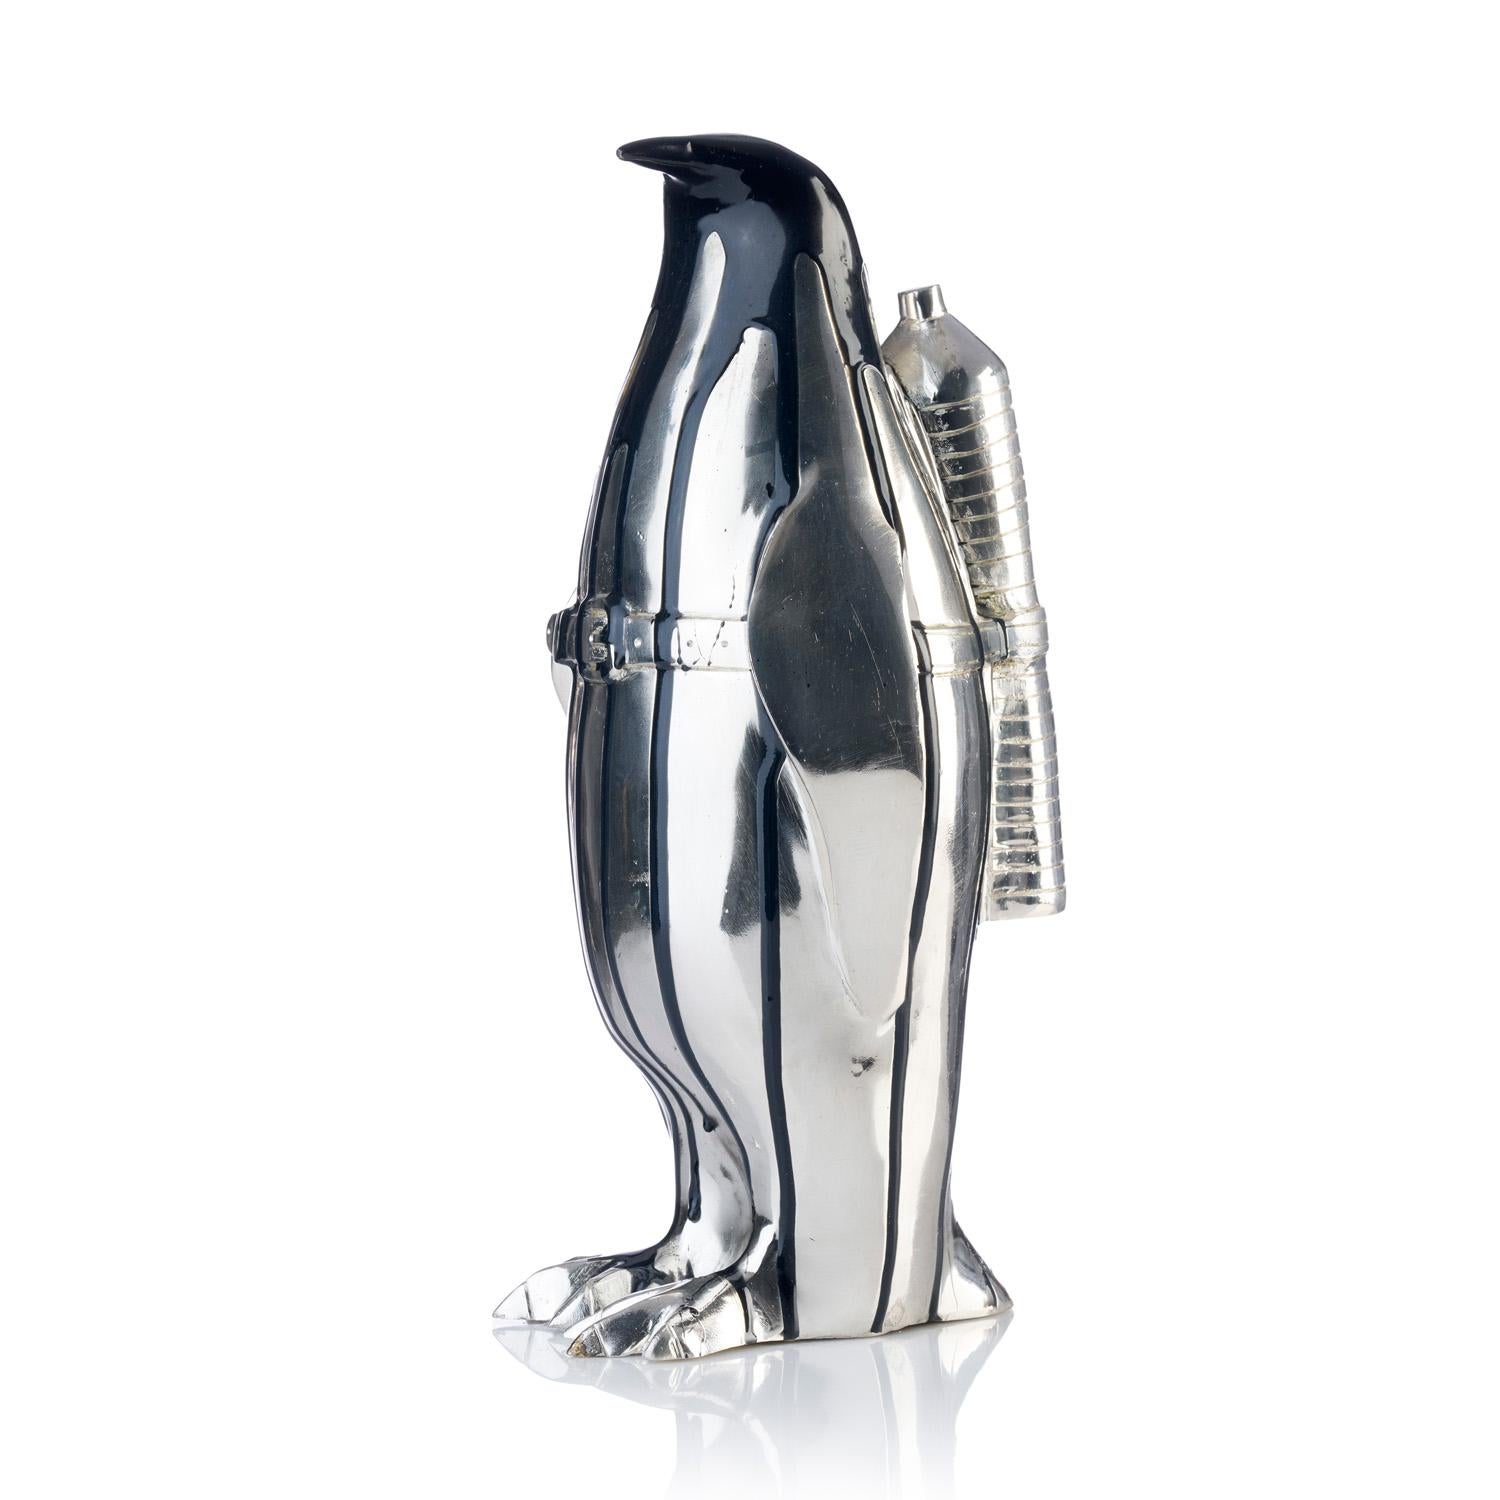 Cloned Penguin with pet bottle (black)  - Gold Figurative Sculpture by William Sweetlove